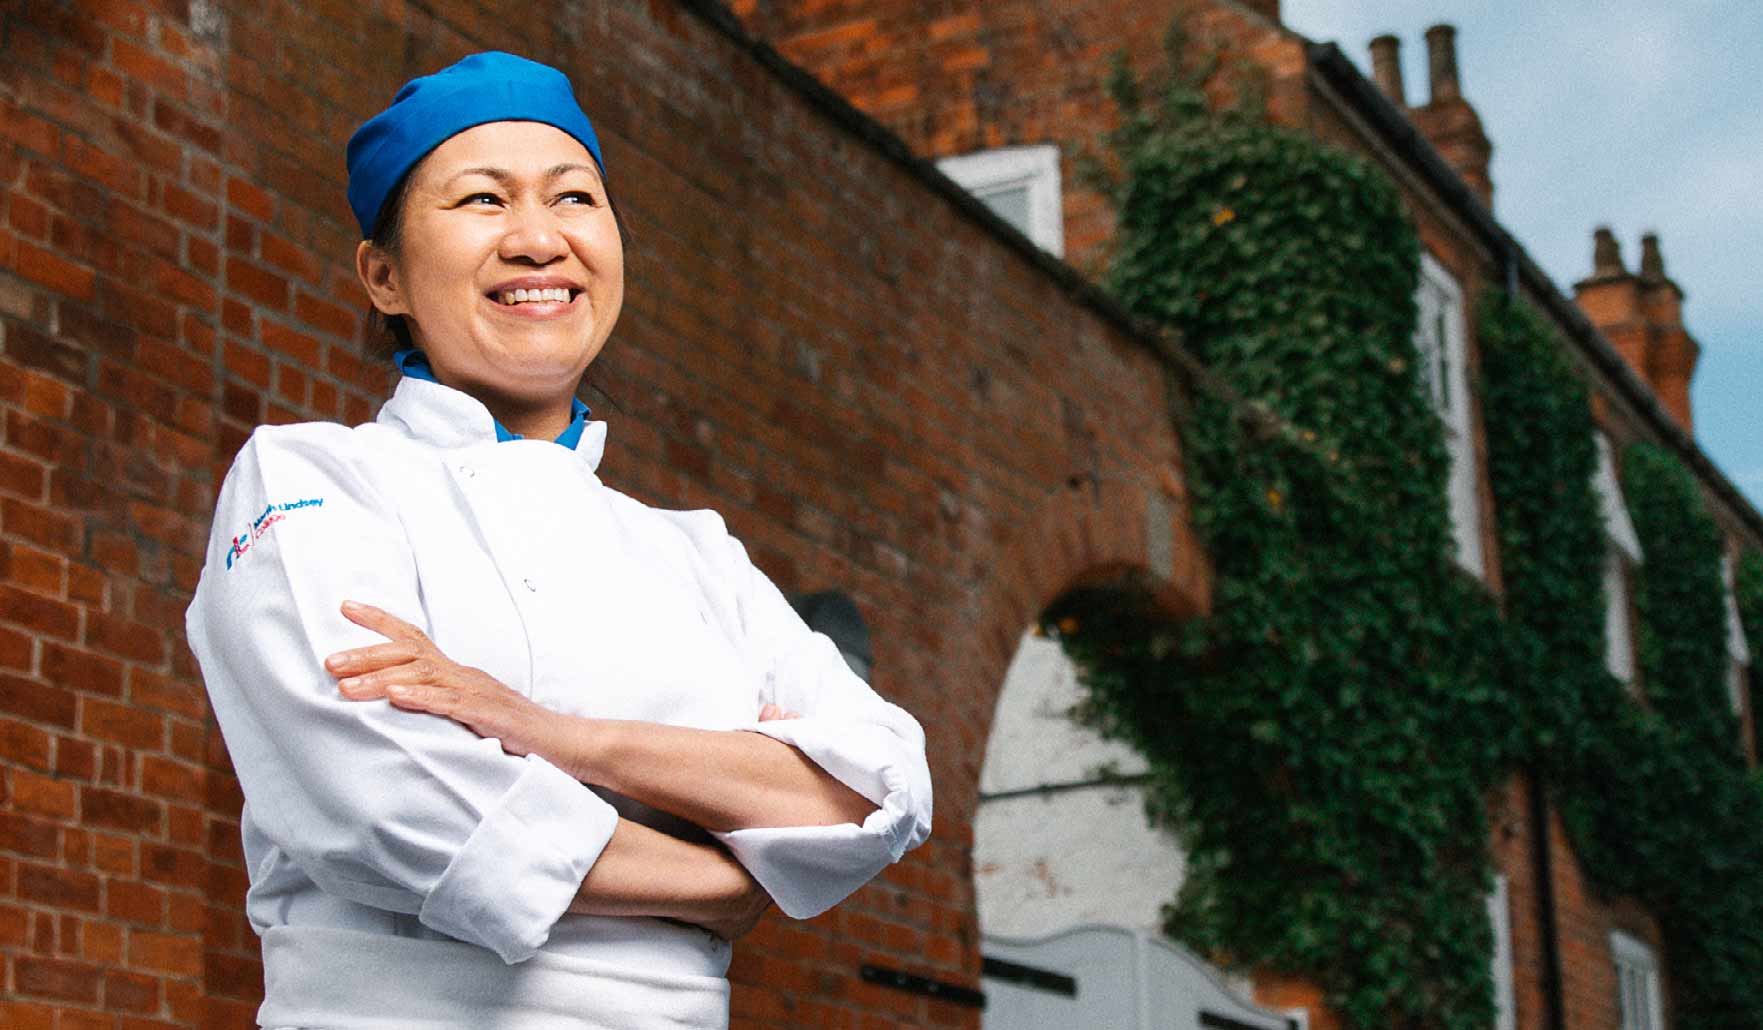 Catering student Tenie stands with arms folded and smiling widely, wearing chef uniform. Tenie is stood in front of a large brick building which appears to be a high class restaurant.